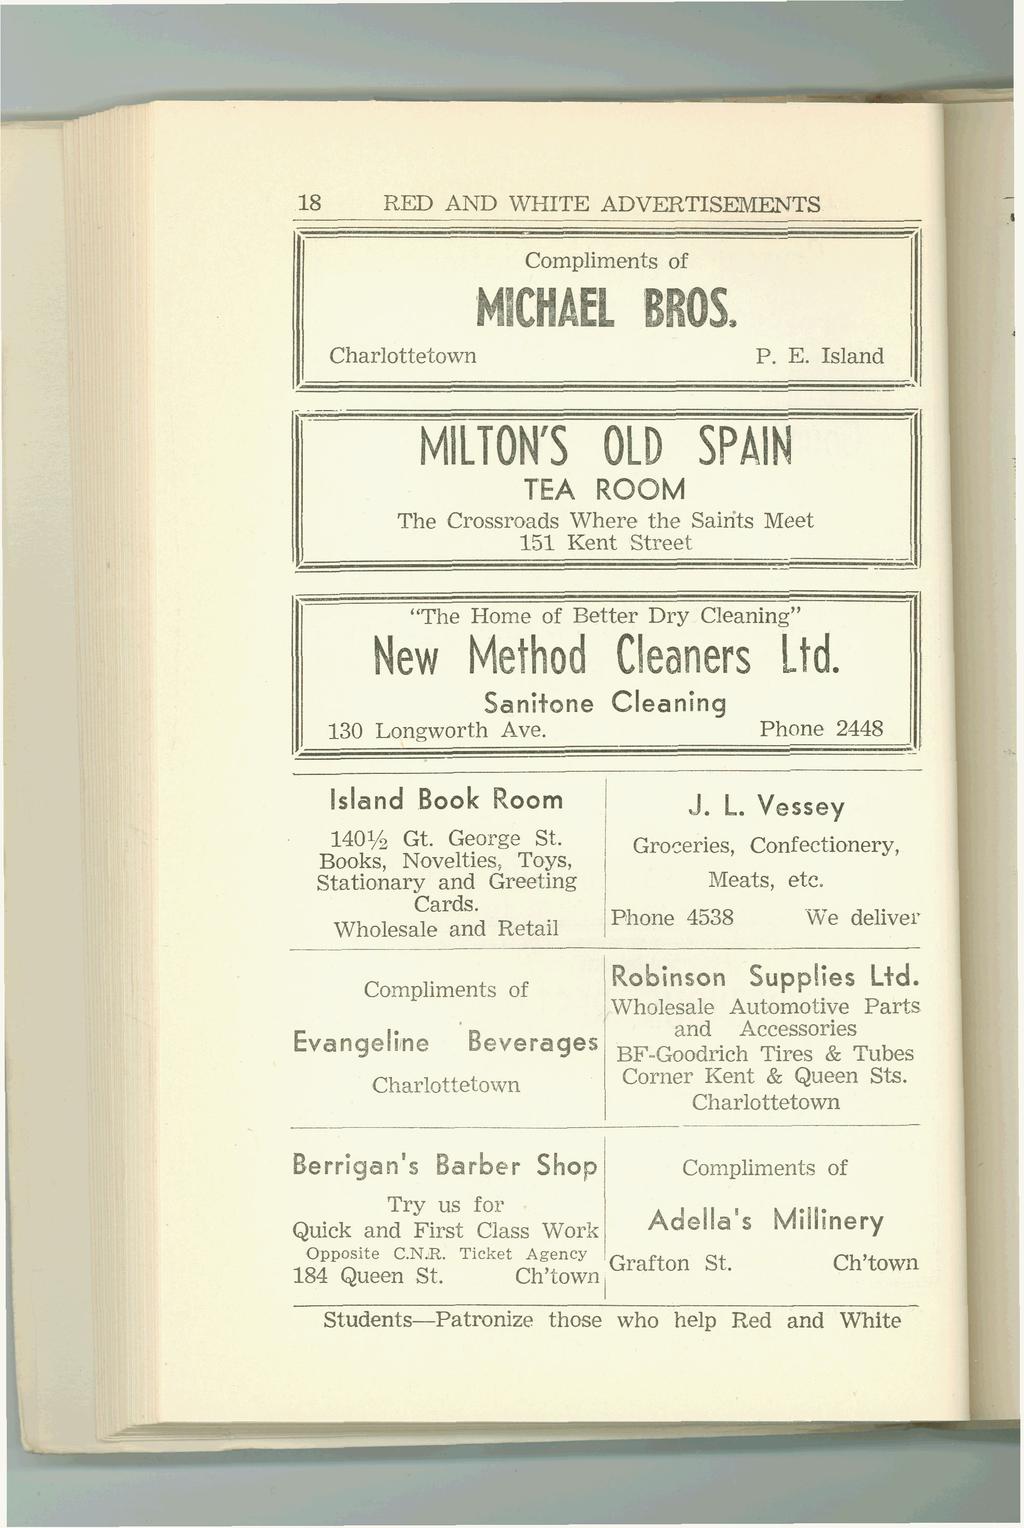 18 RED AND WHITE ADVERTISEMENTS MICHAEL BROS, MILTON S OLD SPA1 TEA ROOM The Crossroads Where the Sairits Meet 151 Kent Street The Home of Better Dry Cleaning New Method Cleaners Ltd.